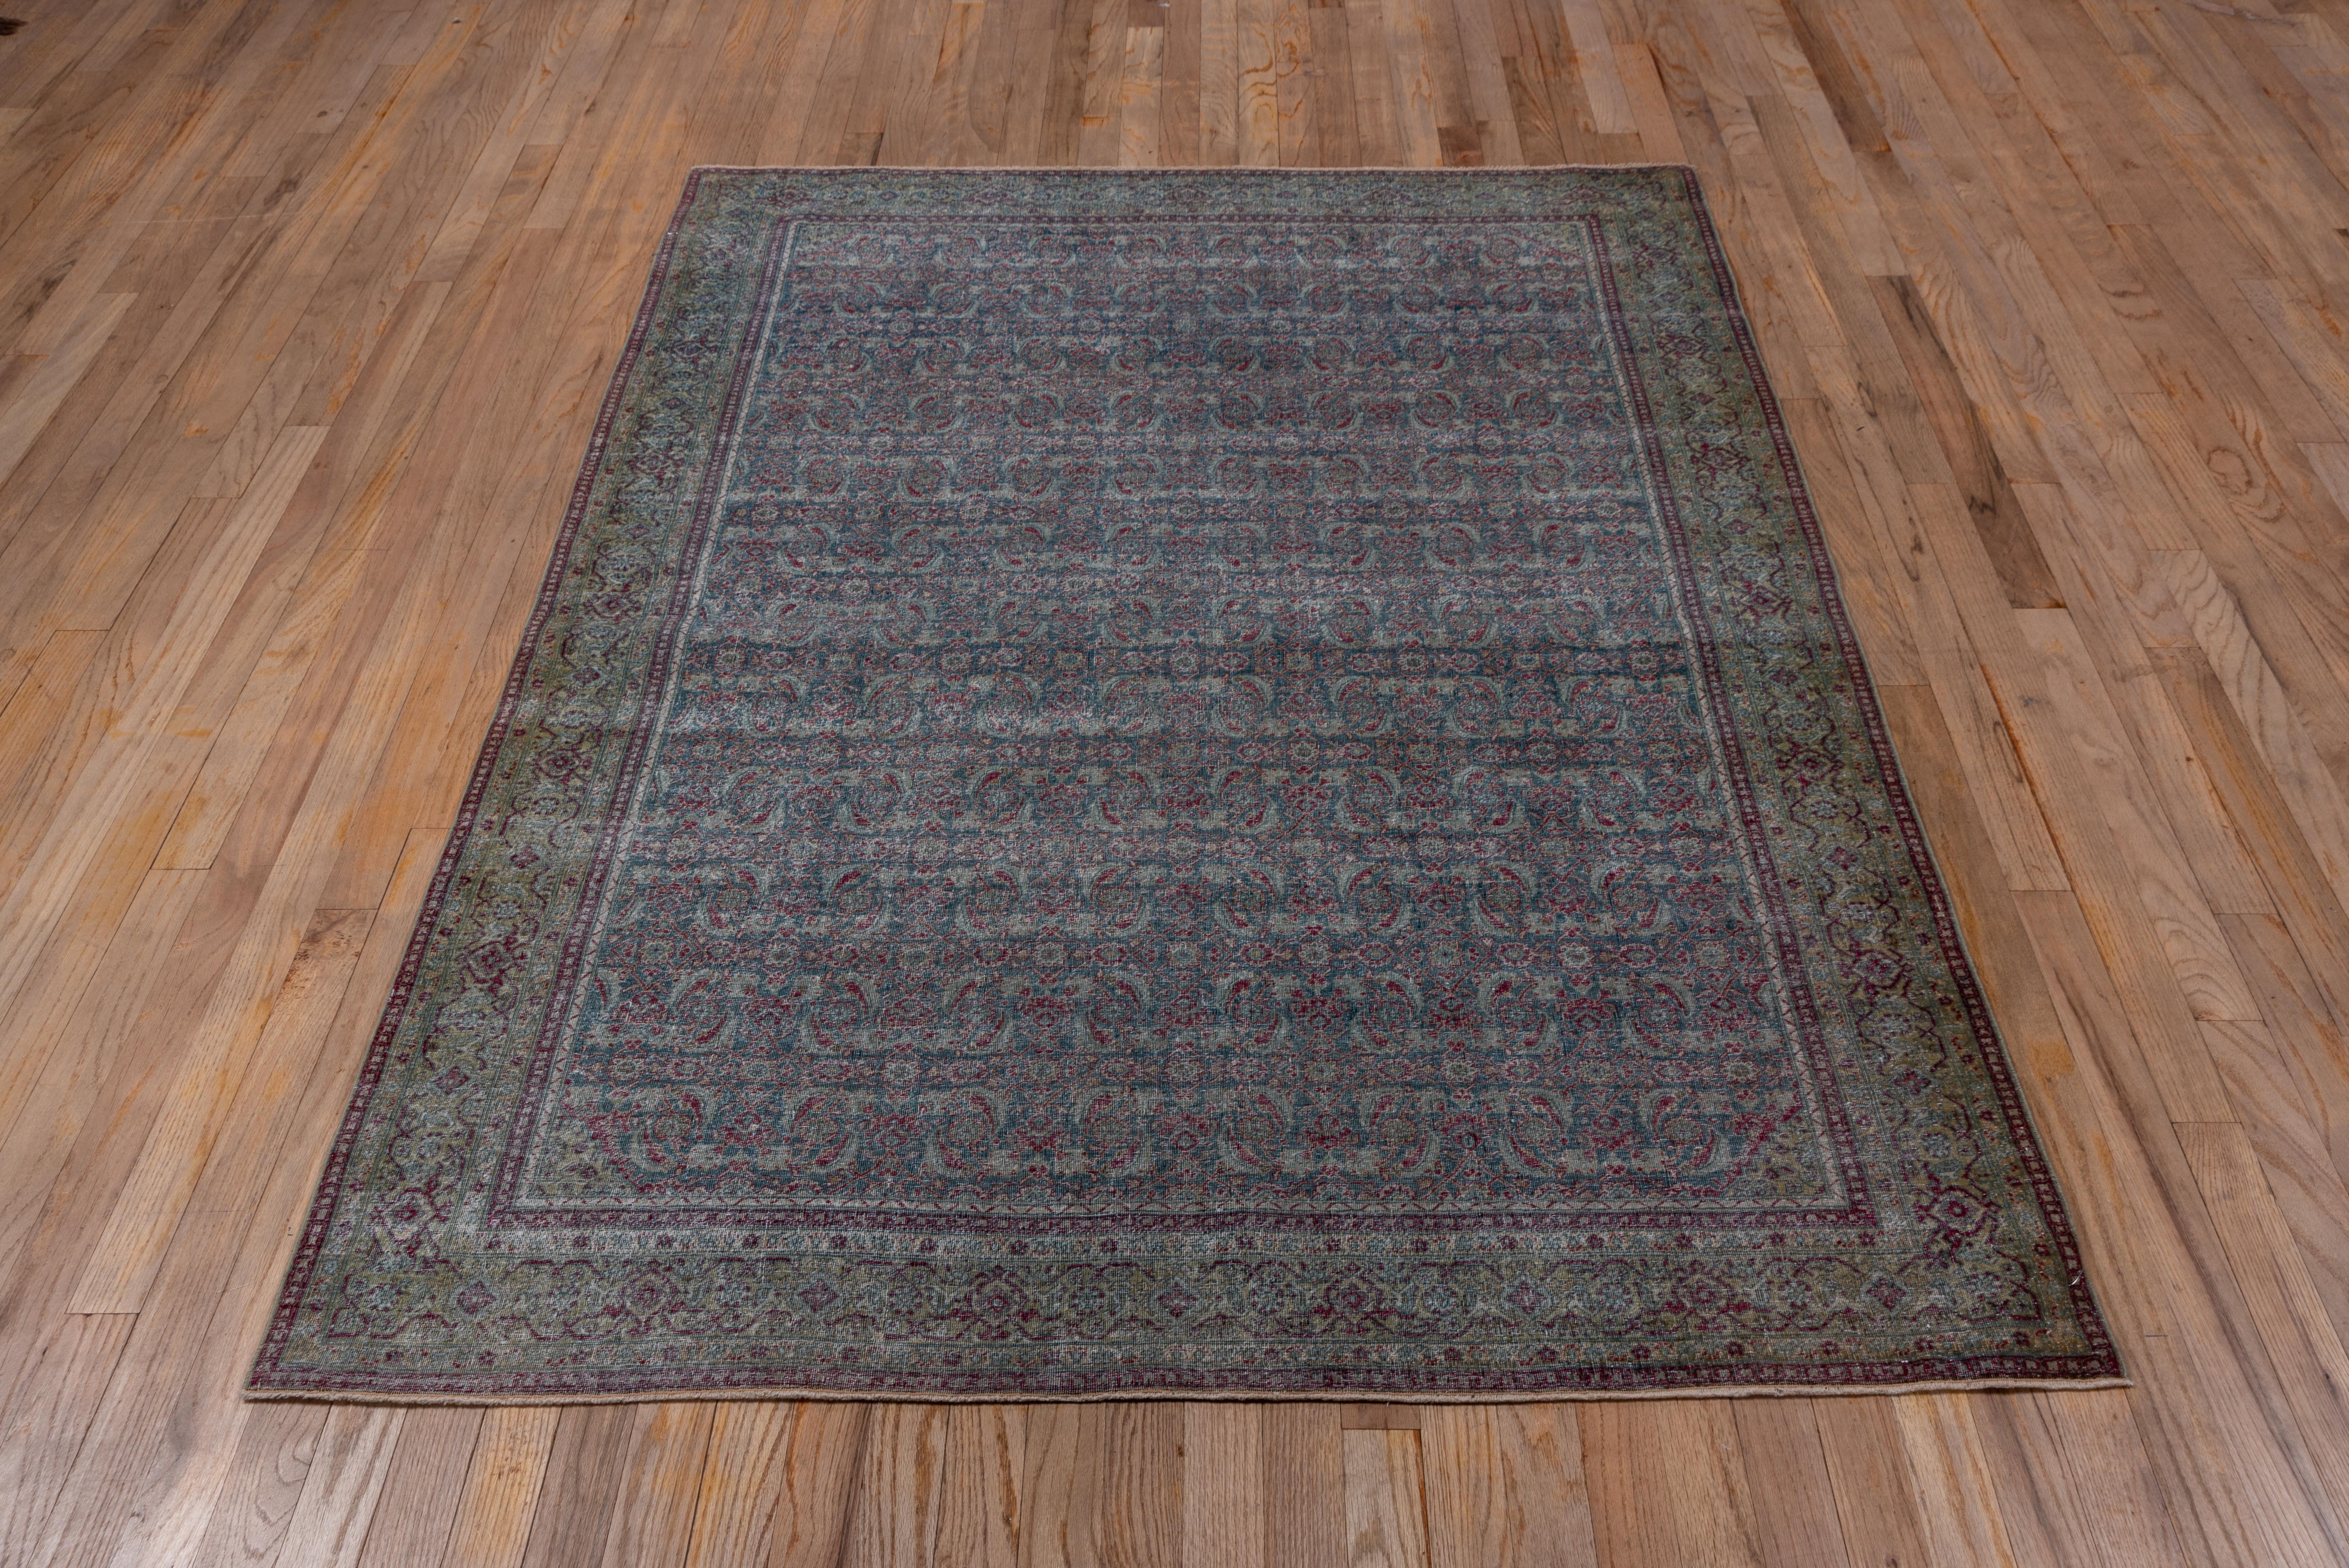 This finely knotted NW Persian city scatter has a minutely rendered Herati design on a slate ground, unfortunately worn to distressed. The camel reversing turtle palmette border shows charcoal accents.